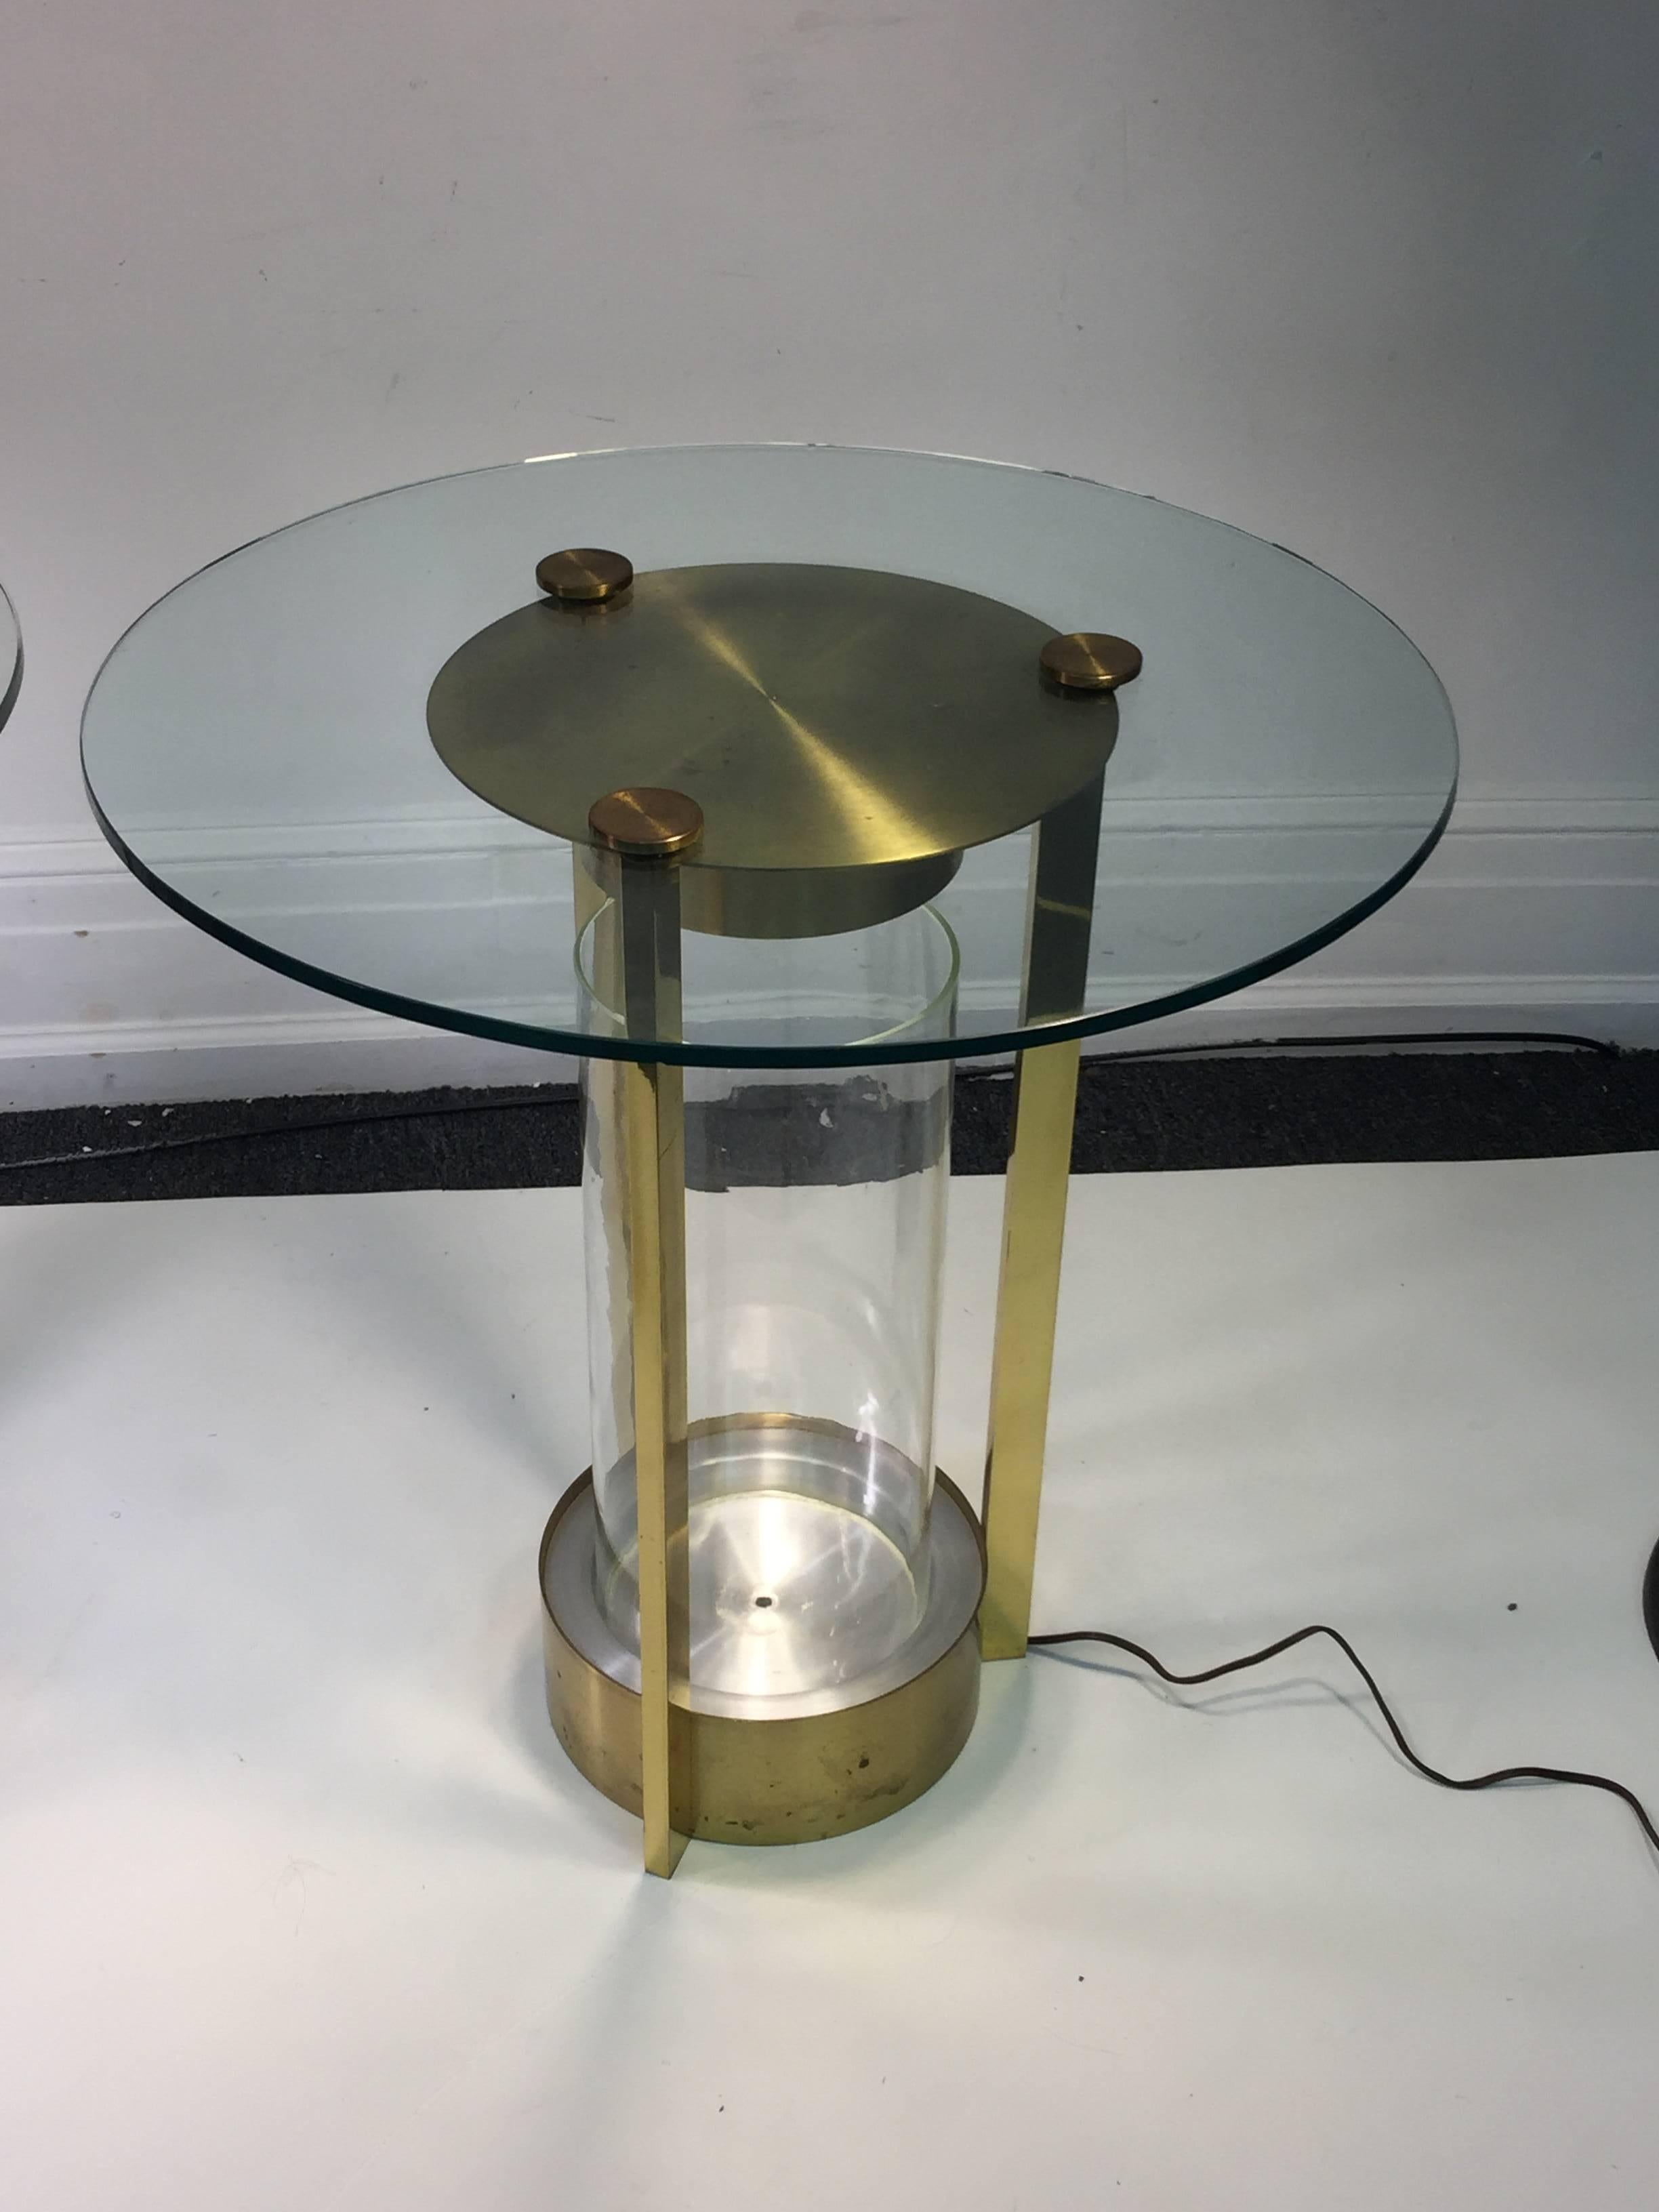 Great pair of modernist brass and glass end tables that illuminate when you would like with switch on the side under the round glass top. These are designed in the 1940s by designer Dorothy Thorpe. There is the original glass cylinder vase that fits